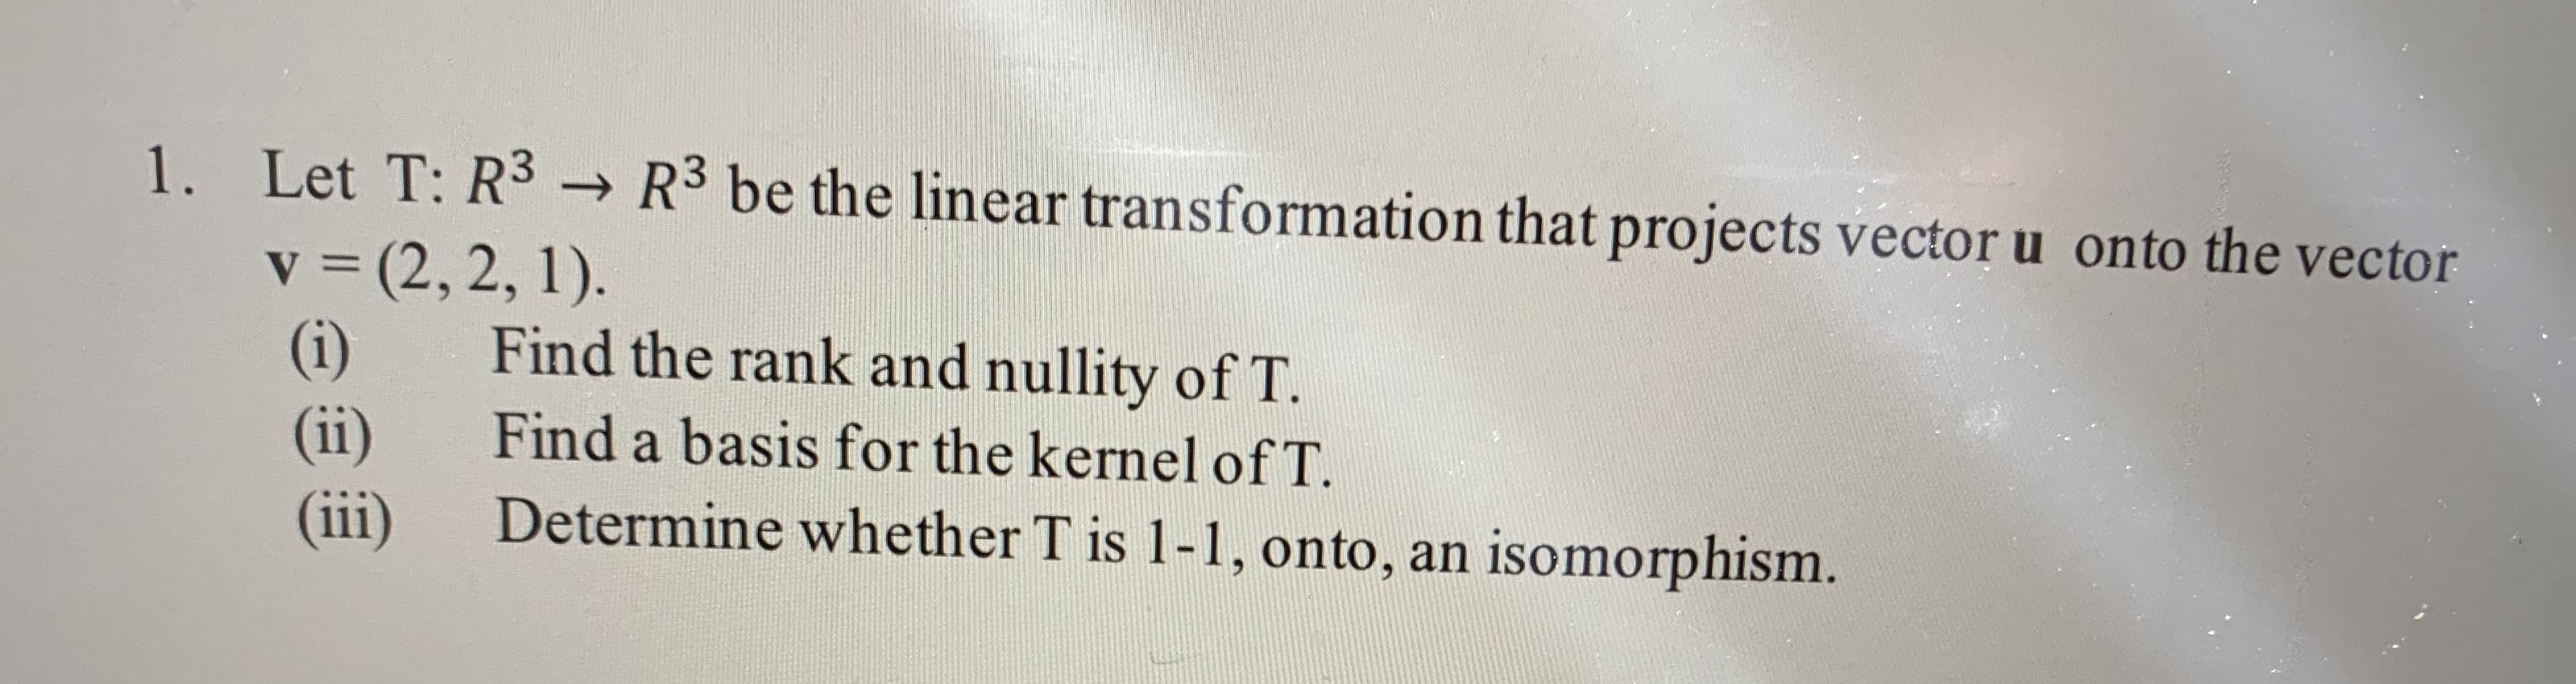 1. Let T: R3 → R3 be the linear transformation that projects vector u onto the vector
v = (2, 2, 1).
(i)
(ii)
(ii)
Find the rank and nullity of T.
Find a basis for the kernel of T.
Determine whether T is 1-1, onto, an isomorphism.
